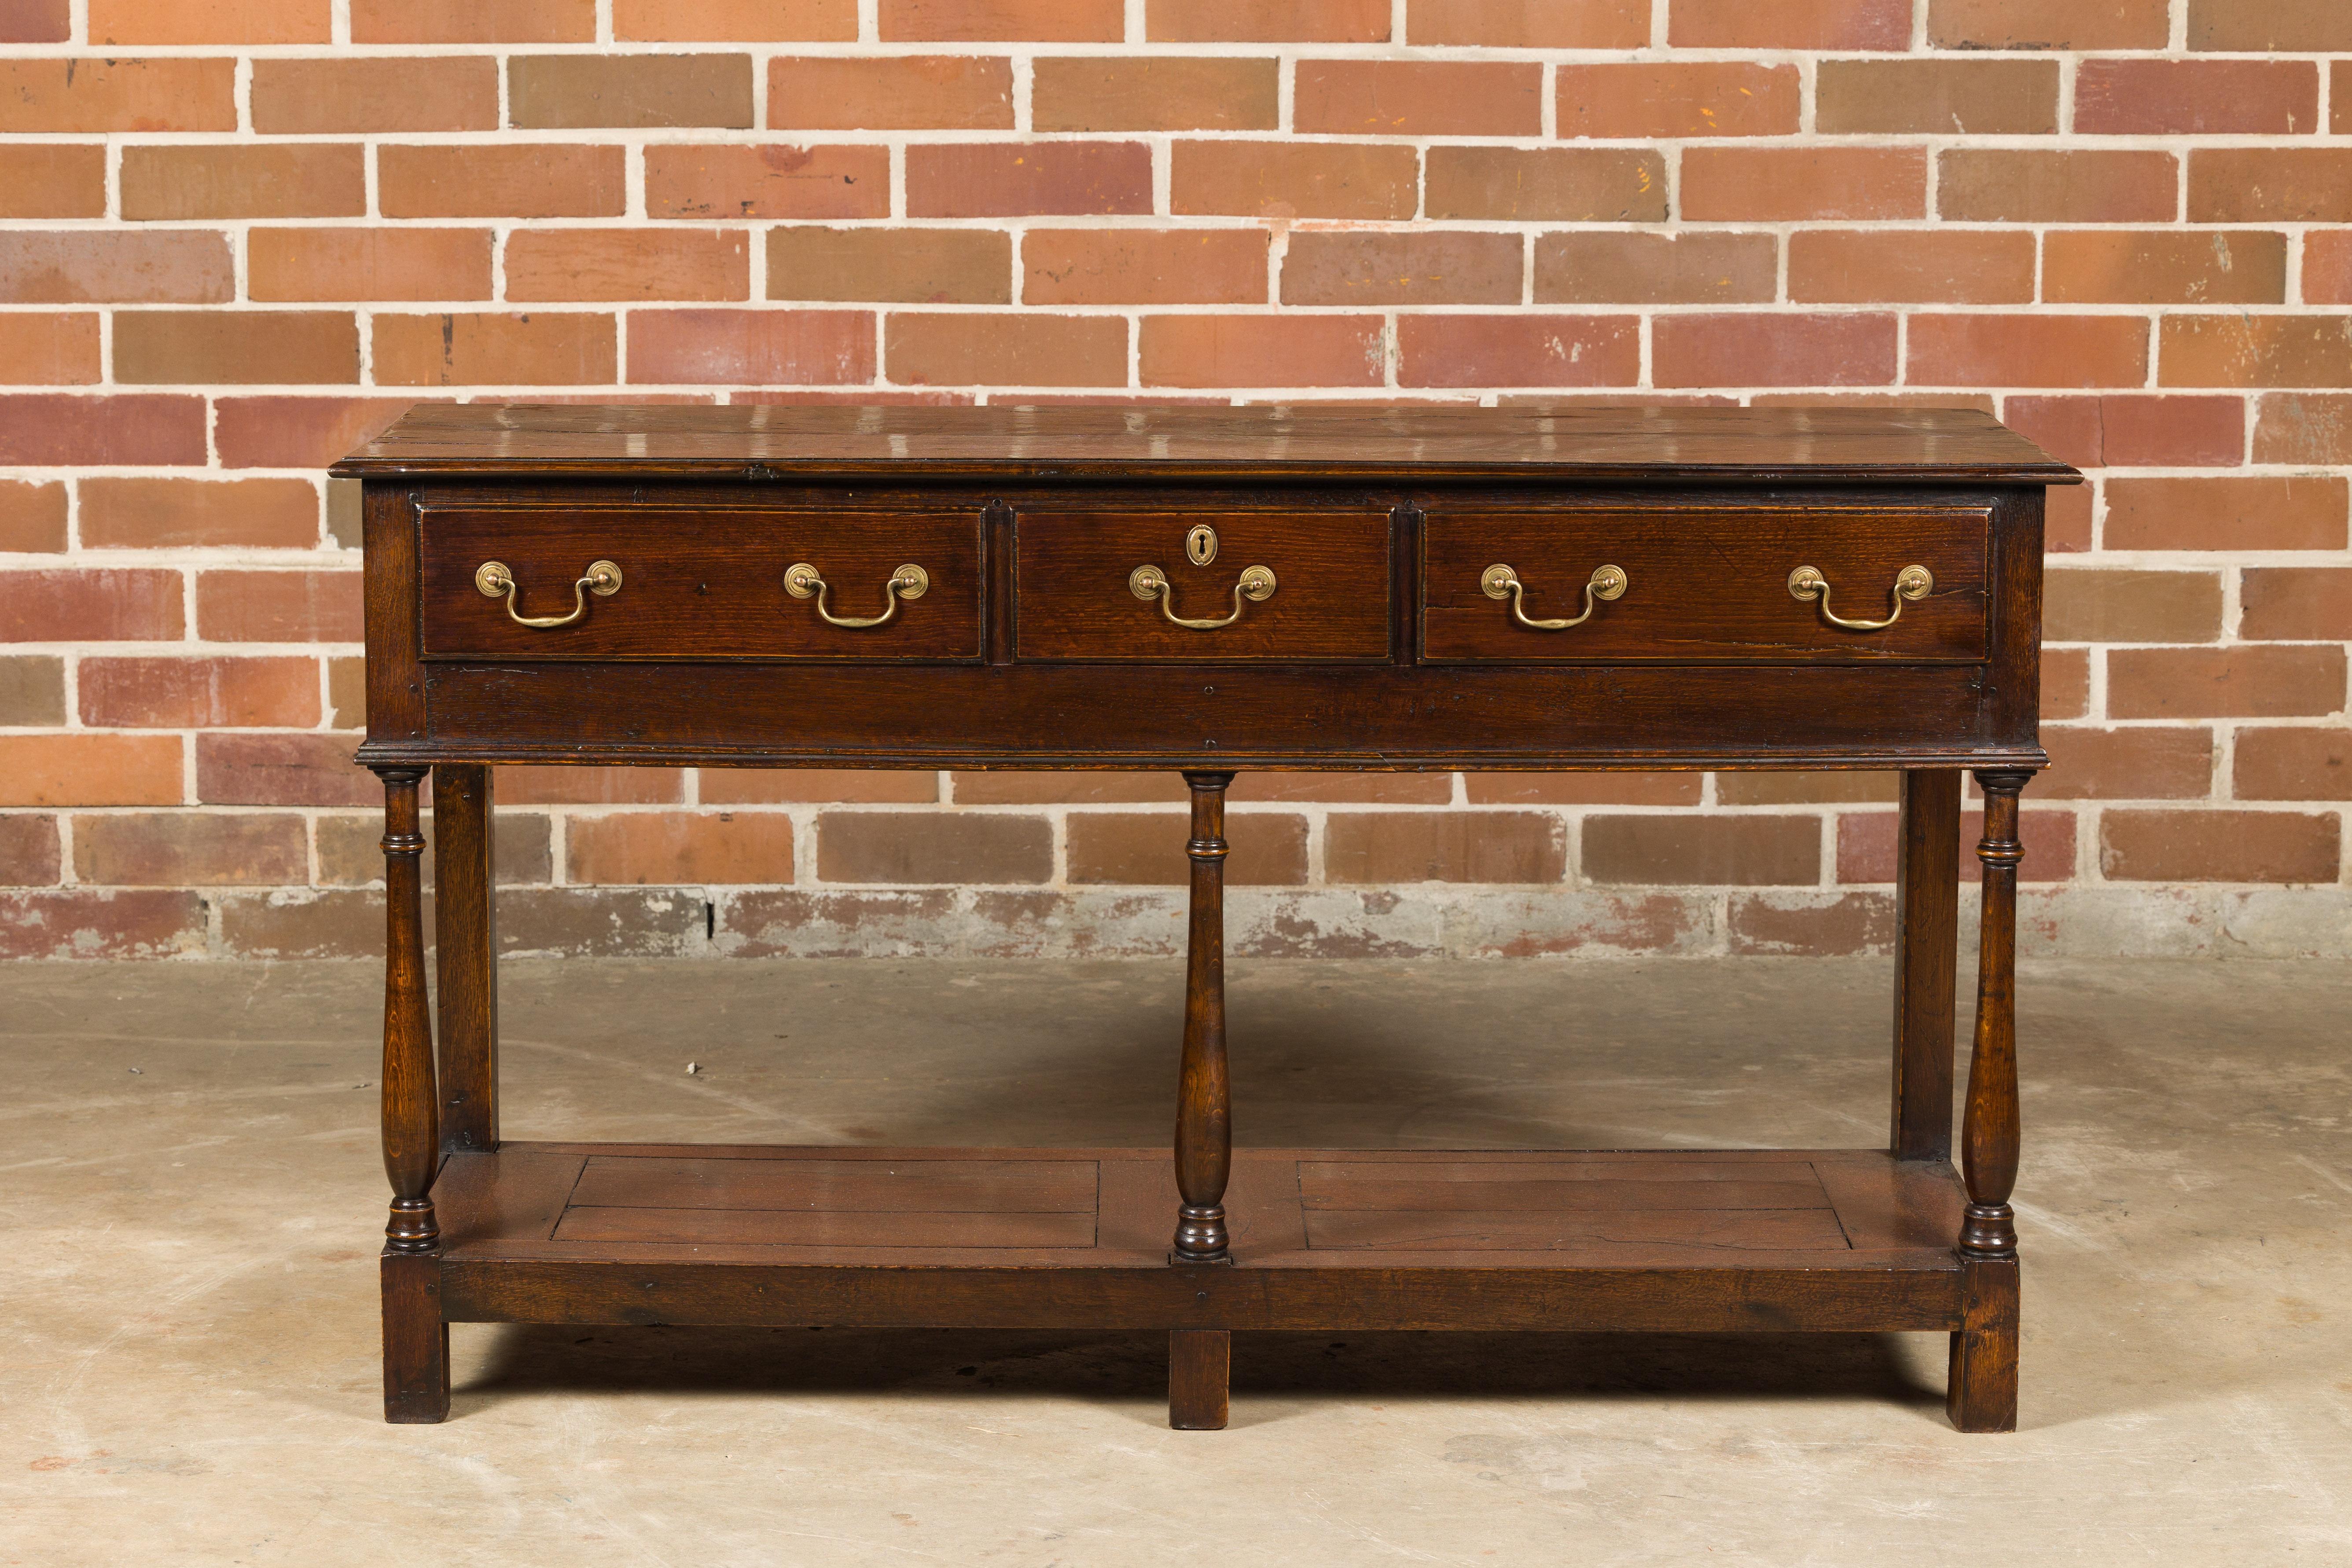 An English oak dresser base from the 19th century with three drawers, low shelf and turned baluster legs. This 19th-century English oak dresser base is a testament to enduring craftsmanship and timeless beauty. Its three drawers, adorned with brass